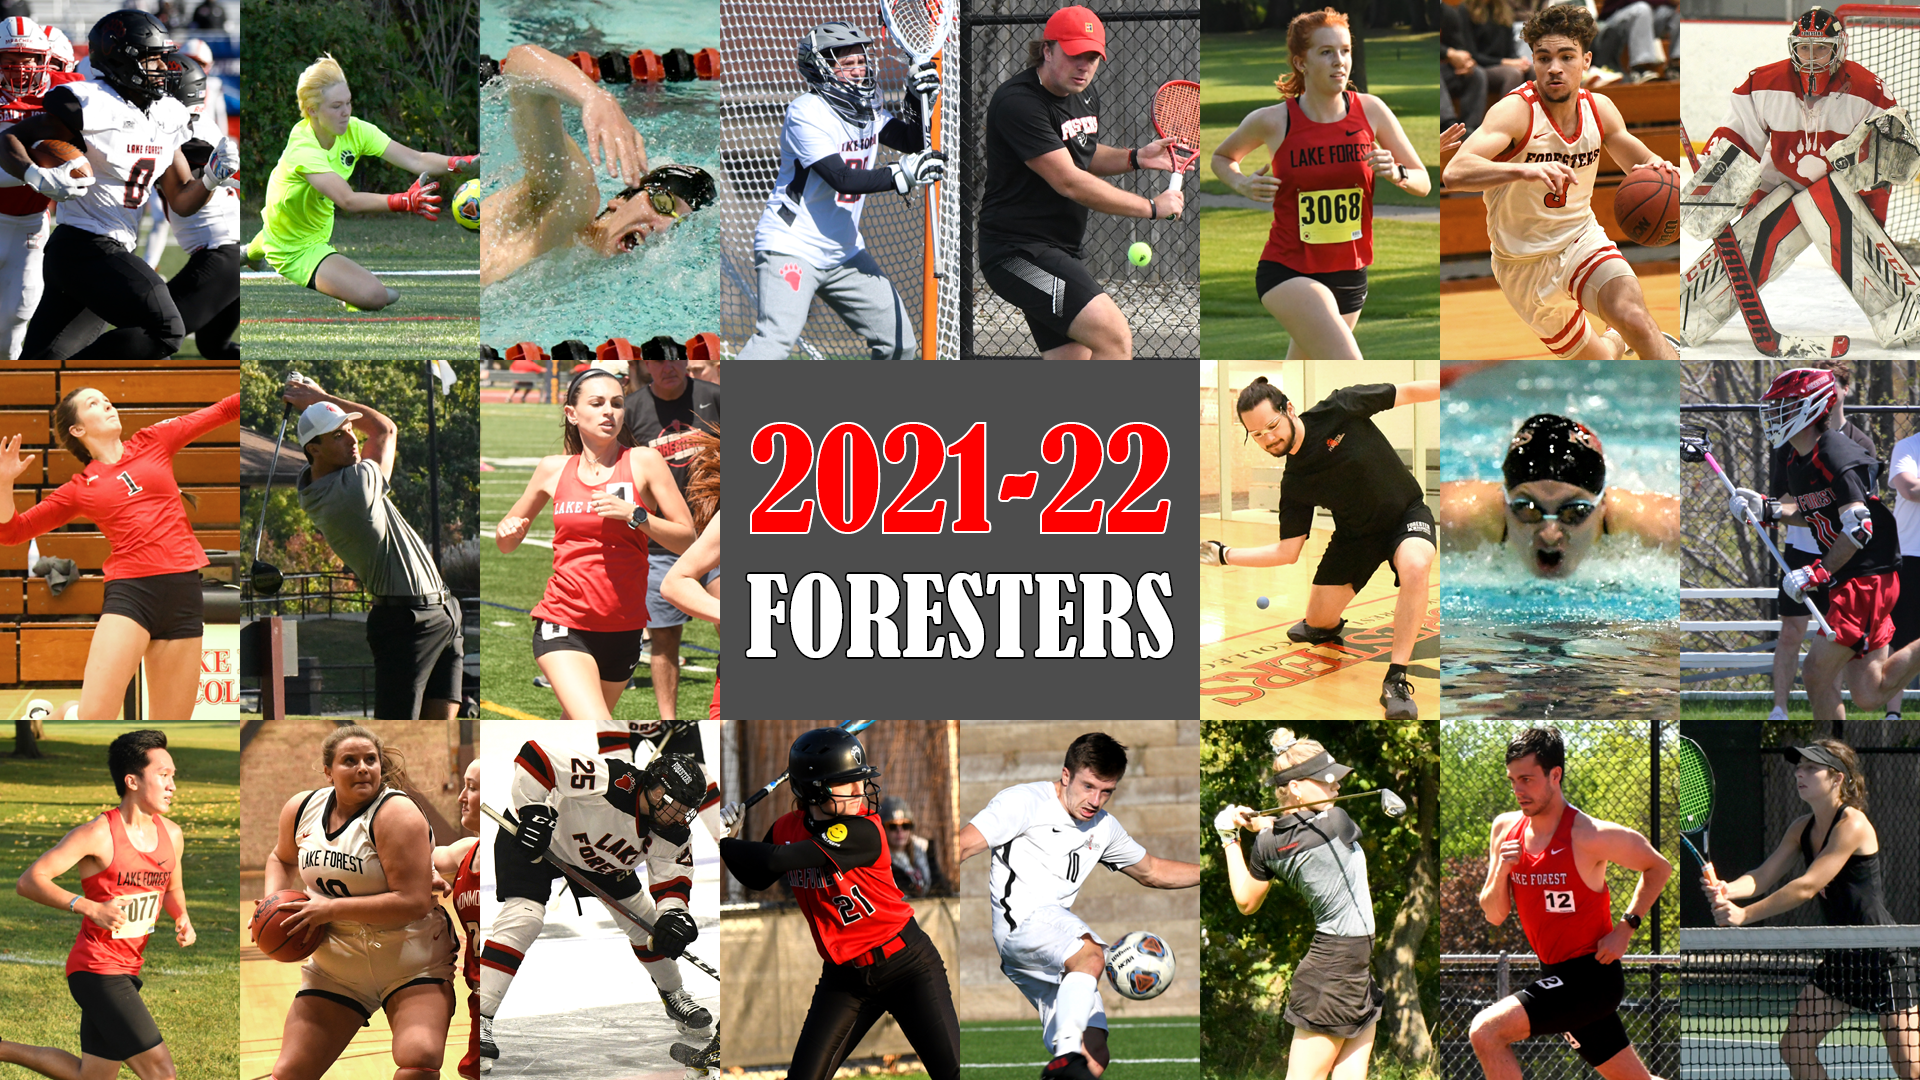 2021-22: Another Successful Year in "The Forest"